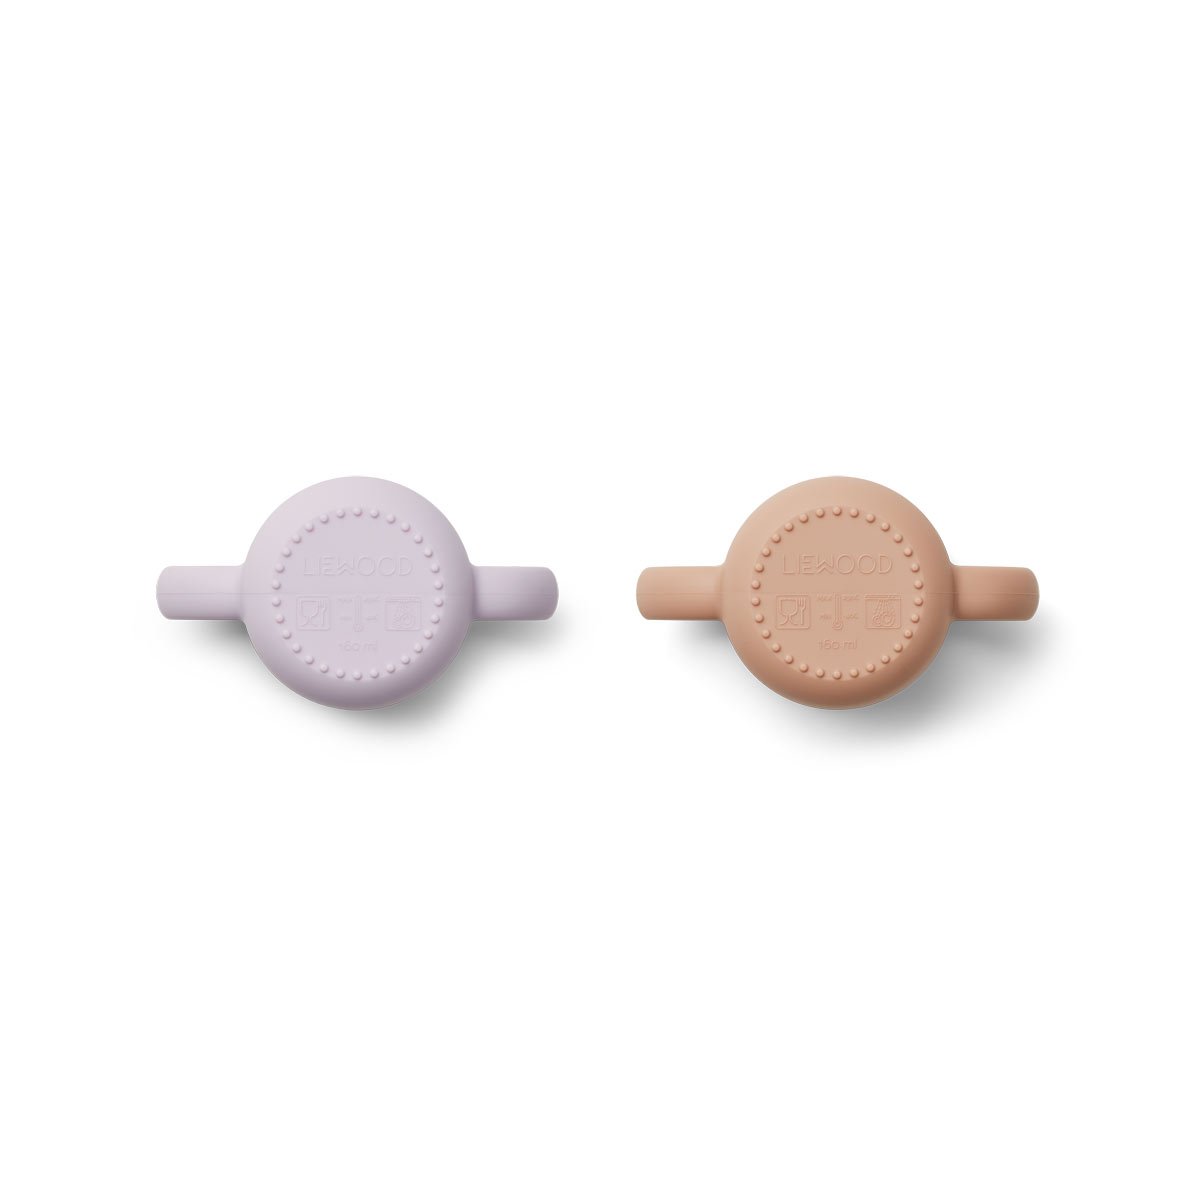 SILICONE CUP ROSE/LIGHT LAVENDER 2-PACK, LIEWOOD